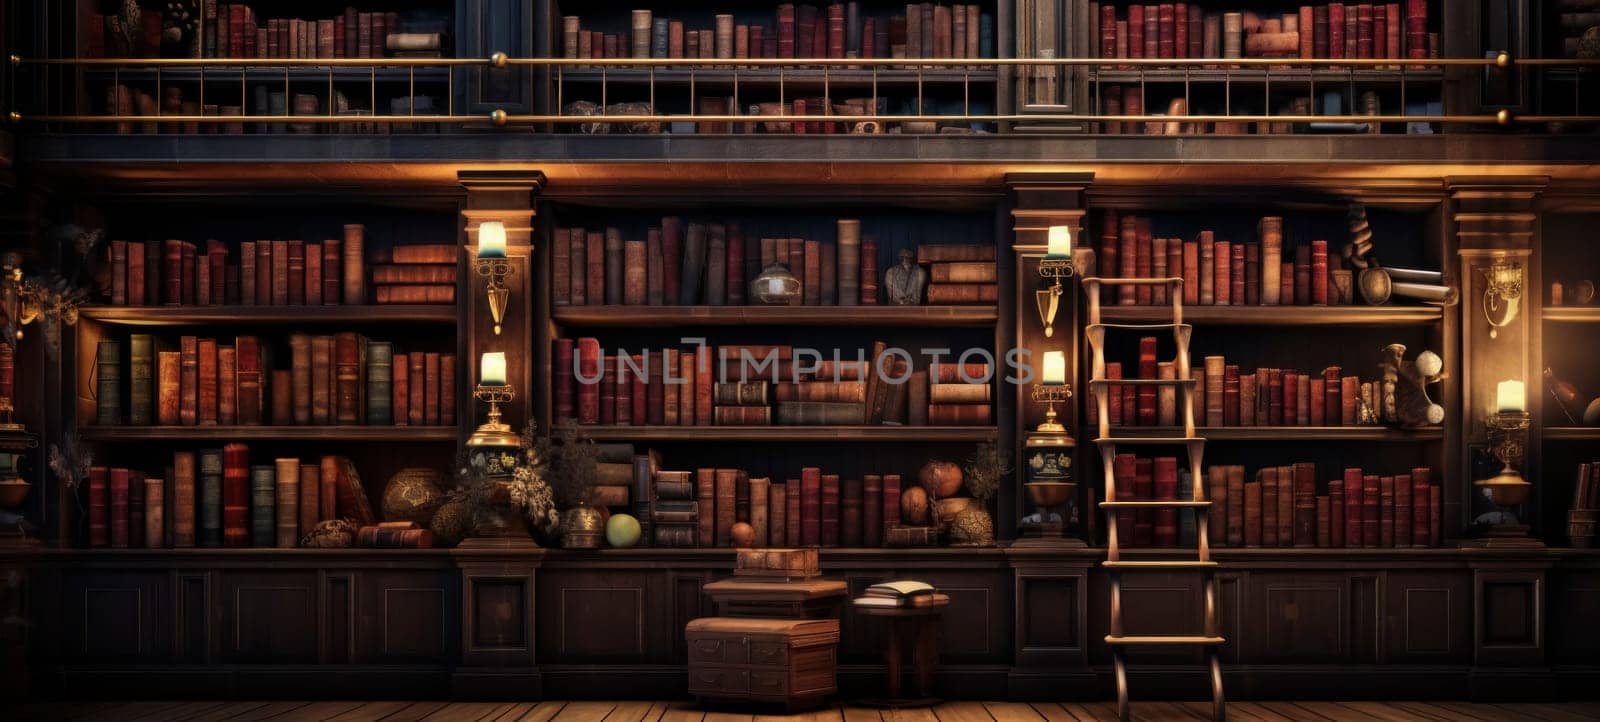 Vintage books on wooden shelves in a classic library setting with warm ambient lighting.